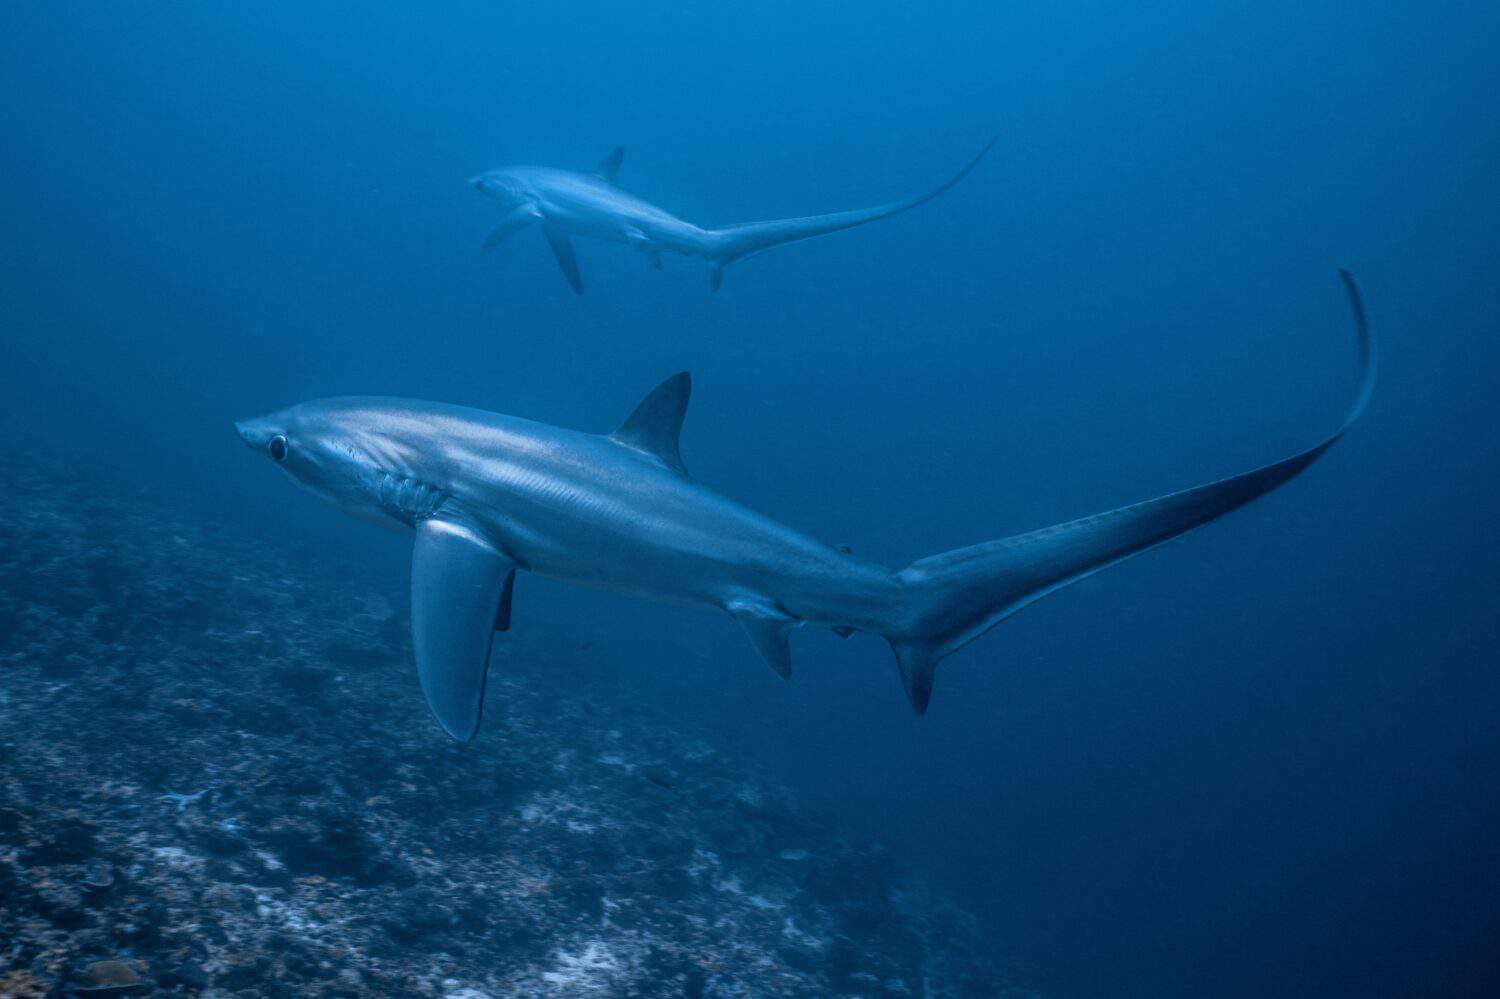 Thresher sharks are carnivorous and primarily feed on small fish and squid. They use their tails to herd their prey and then strike them with their jaws.